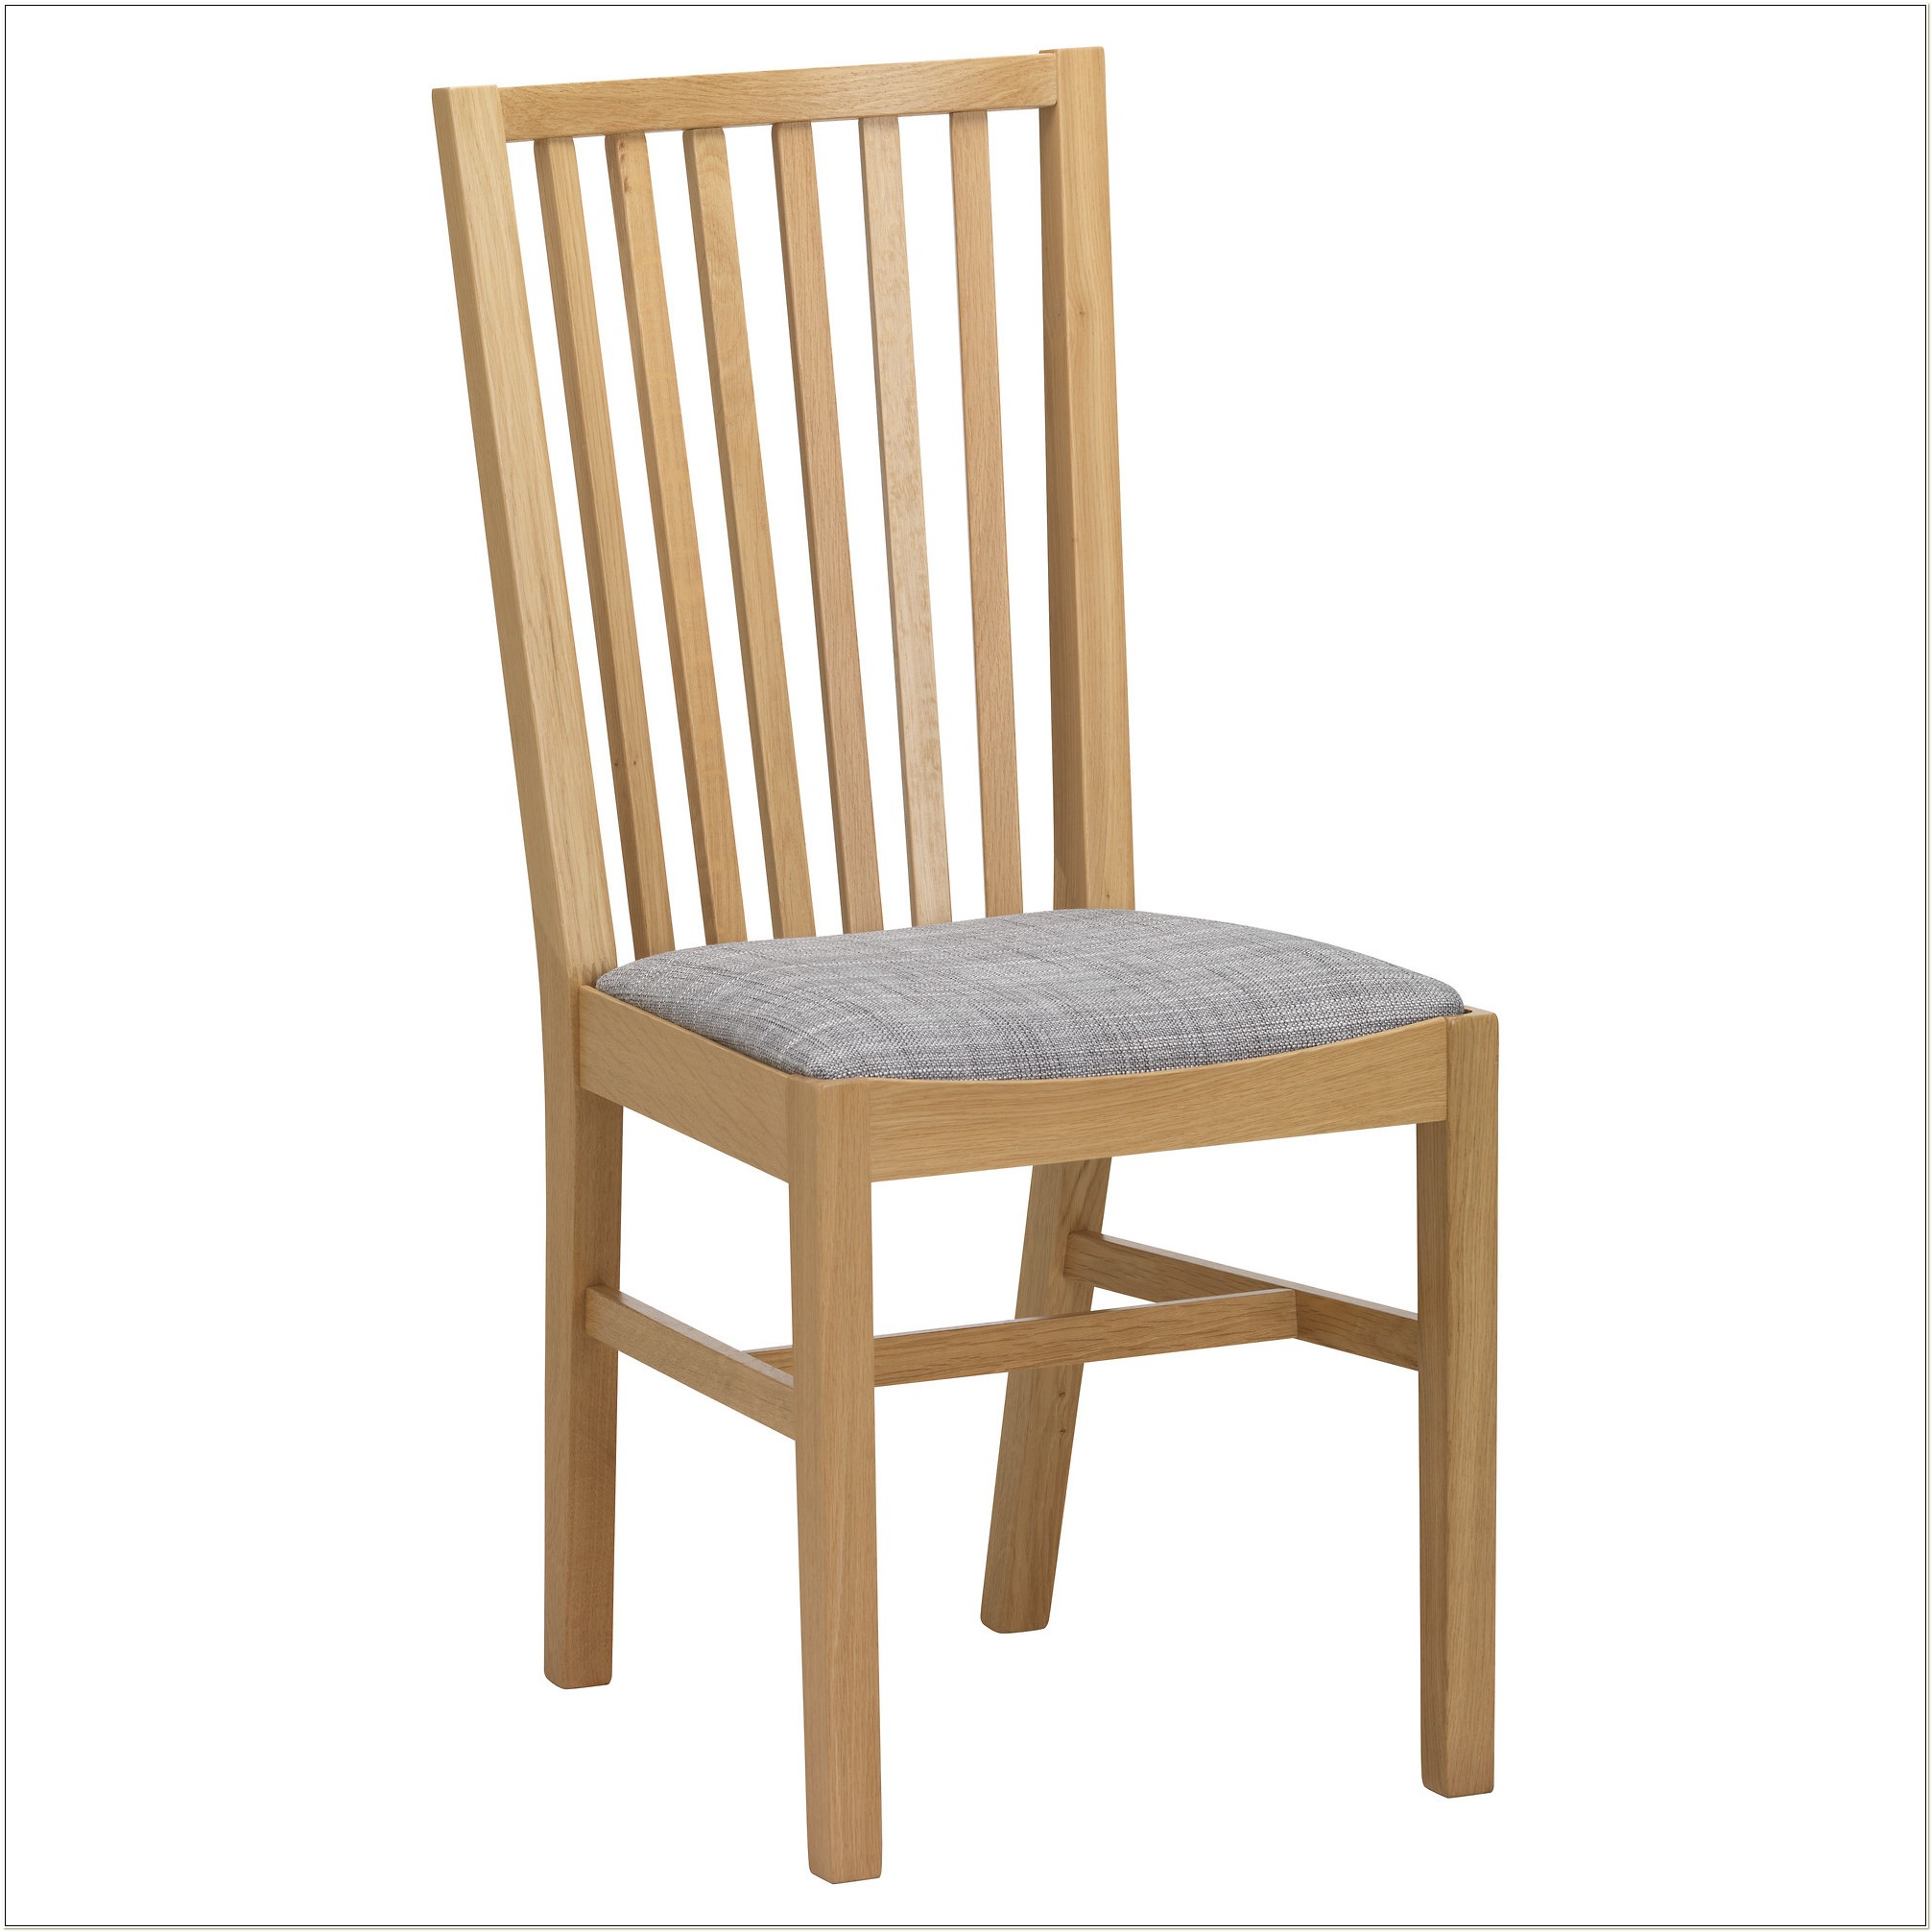 Ikea Dining Chairs Uk  Chairs  Home Decorating Ideas #L96WBBgGVv